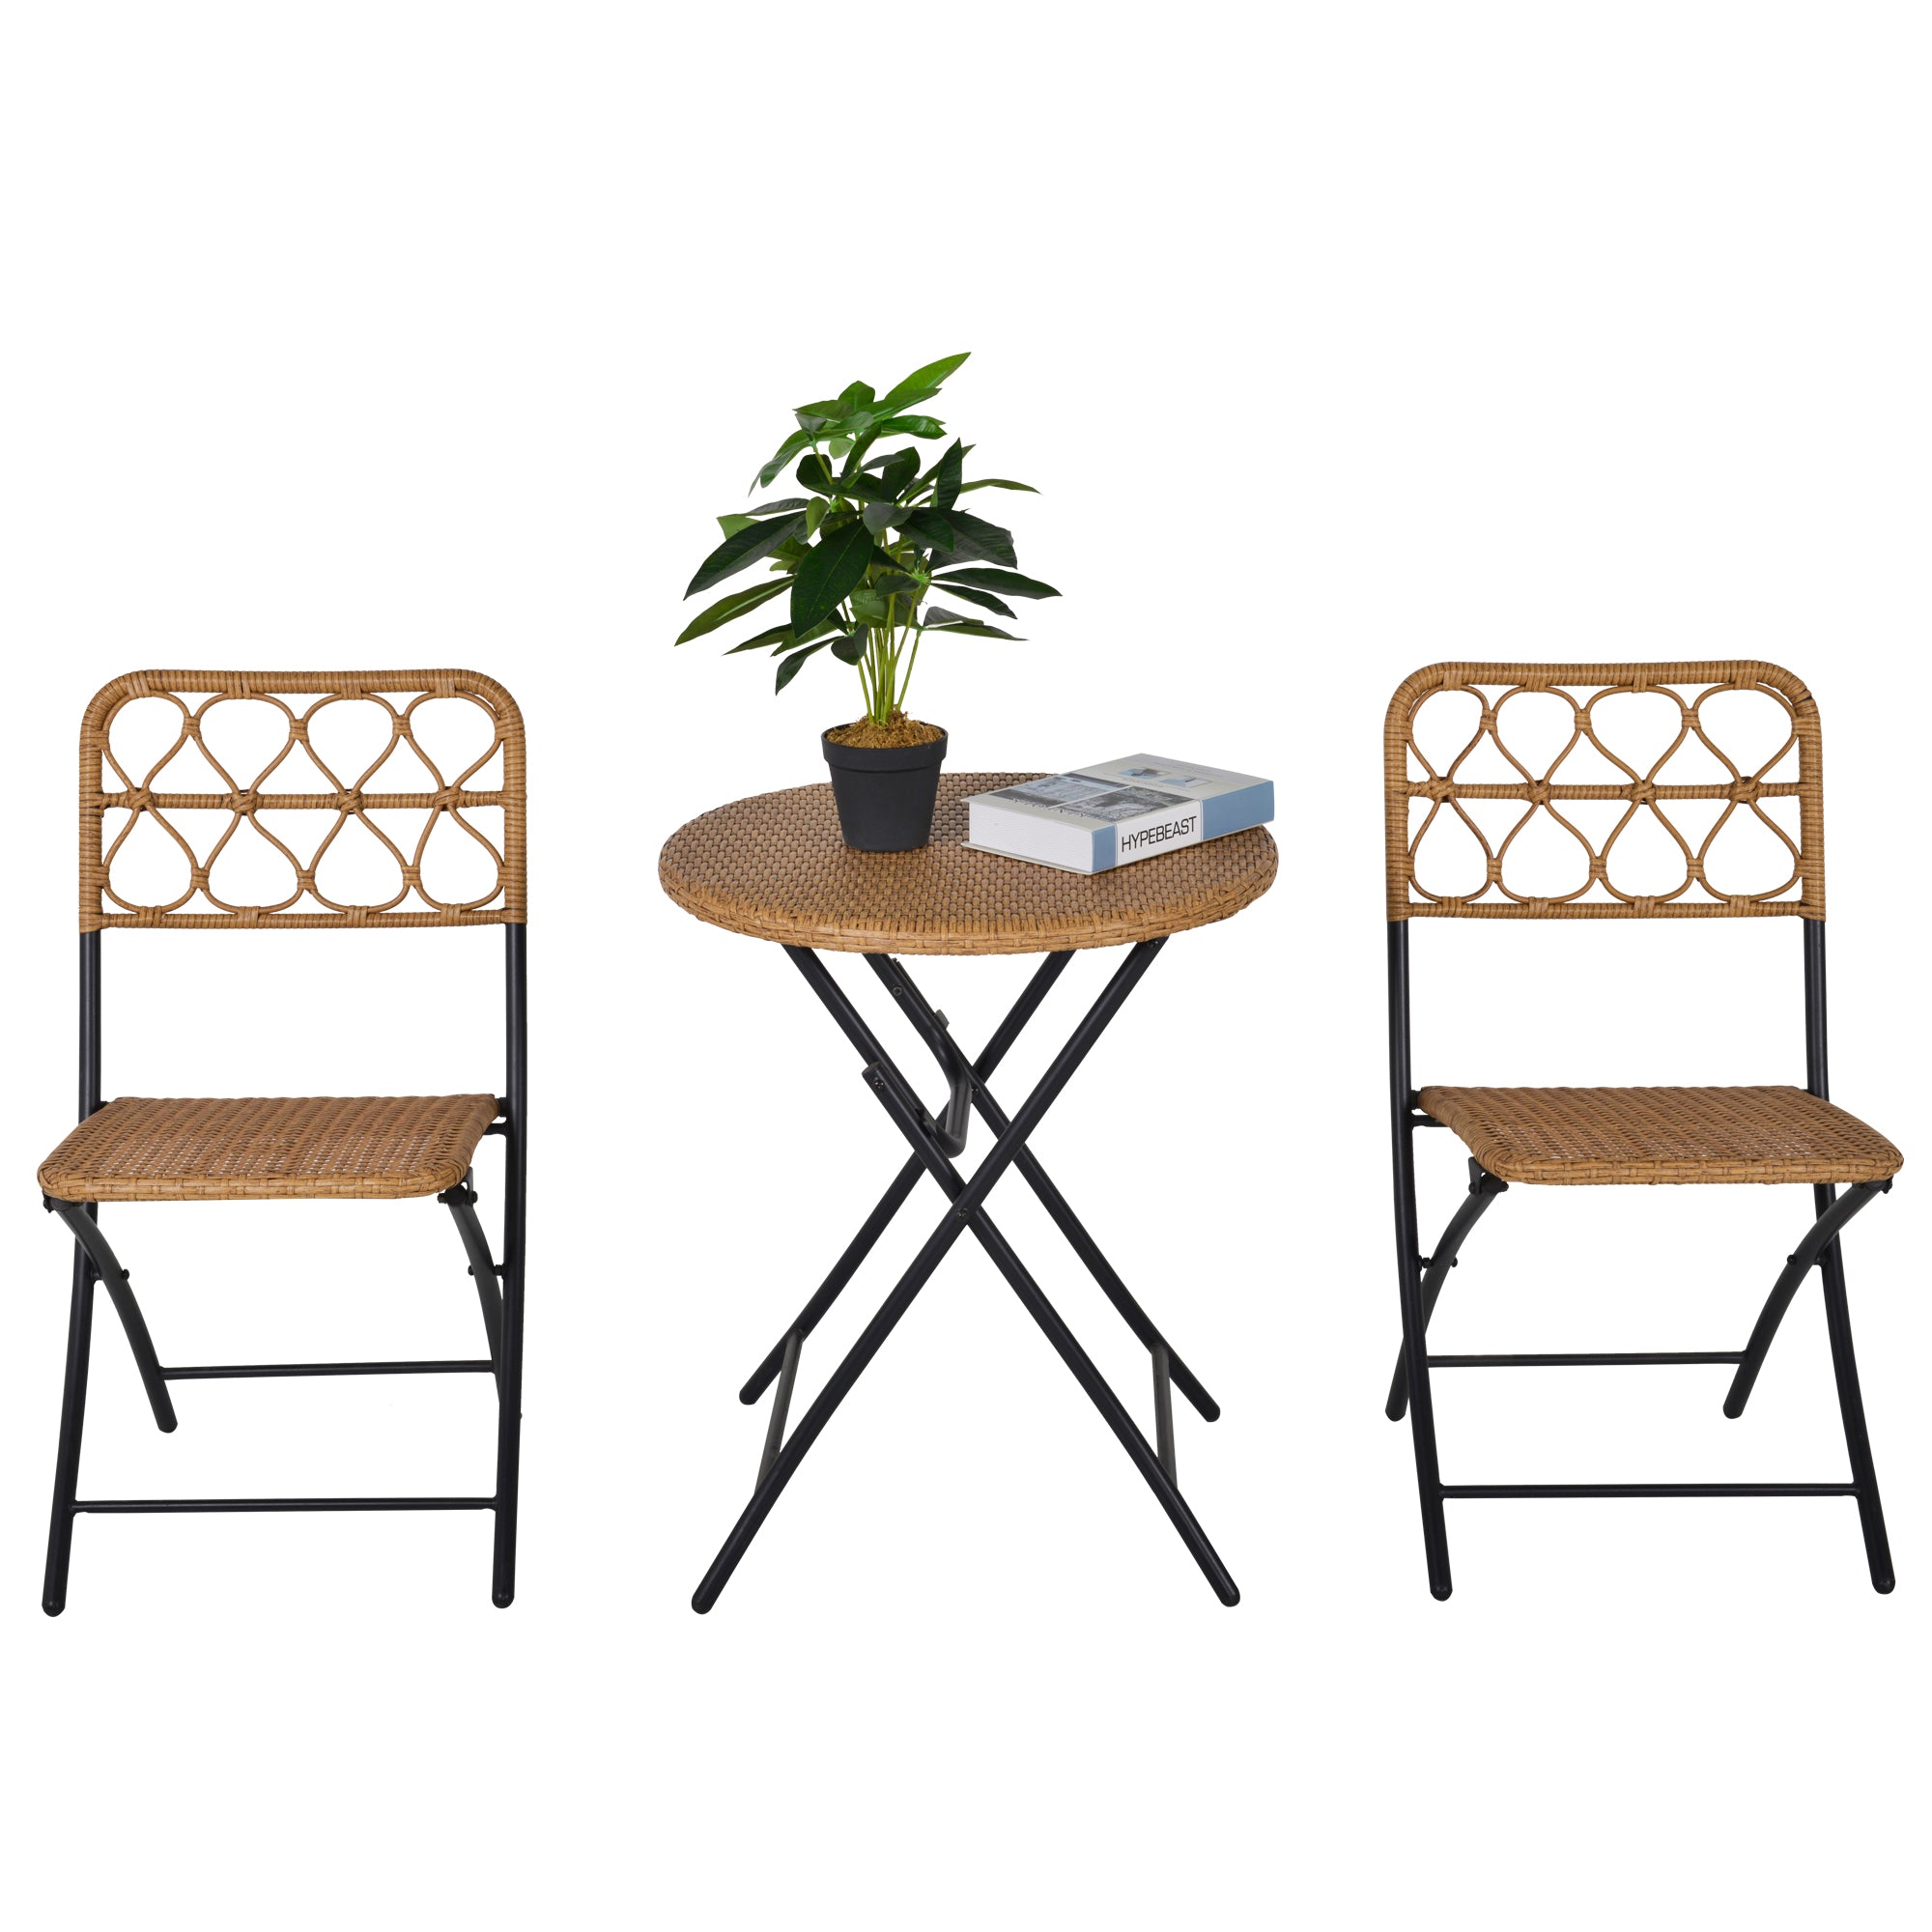 Nancy's Caldwell Garden seating group - Bistro set - Foldable - Steel - Natural - 60 x 71 cm